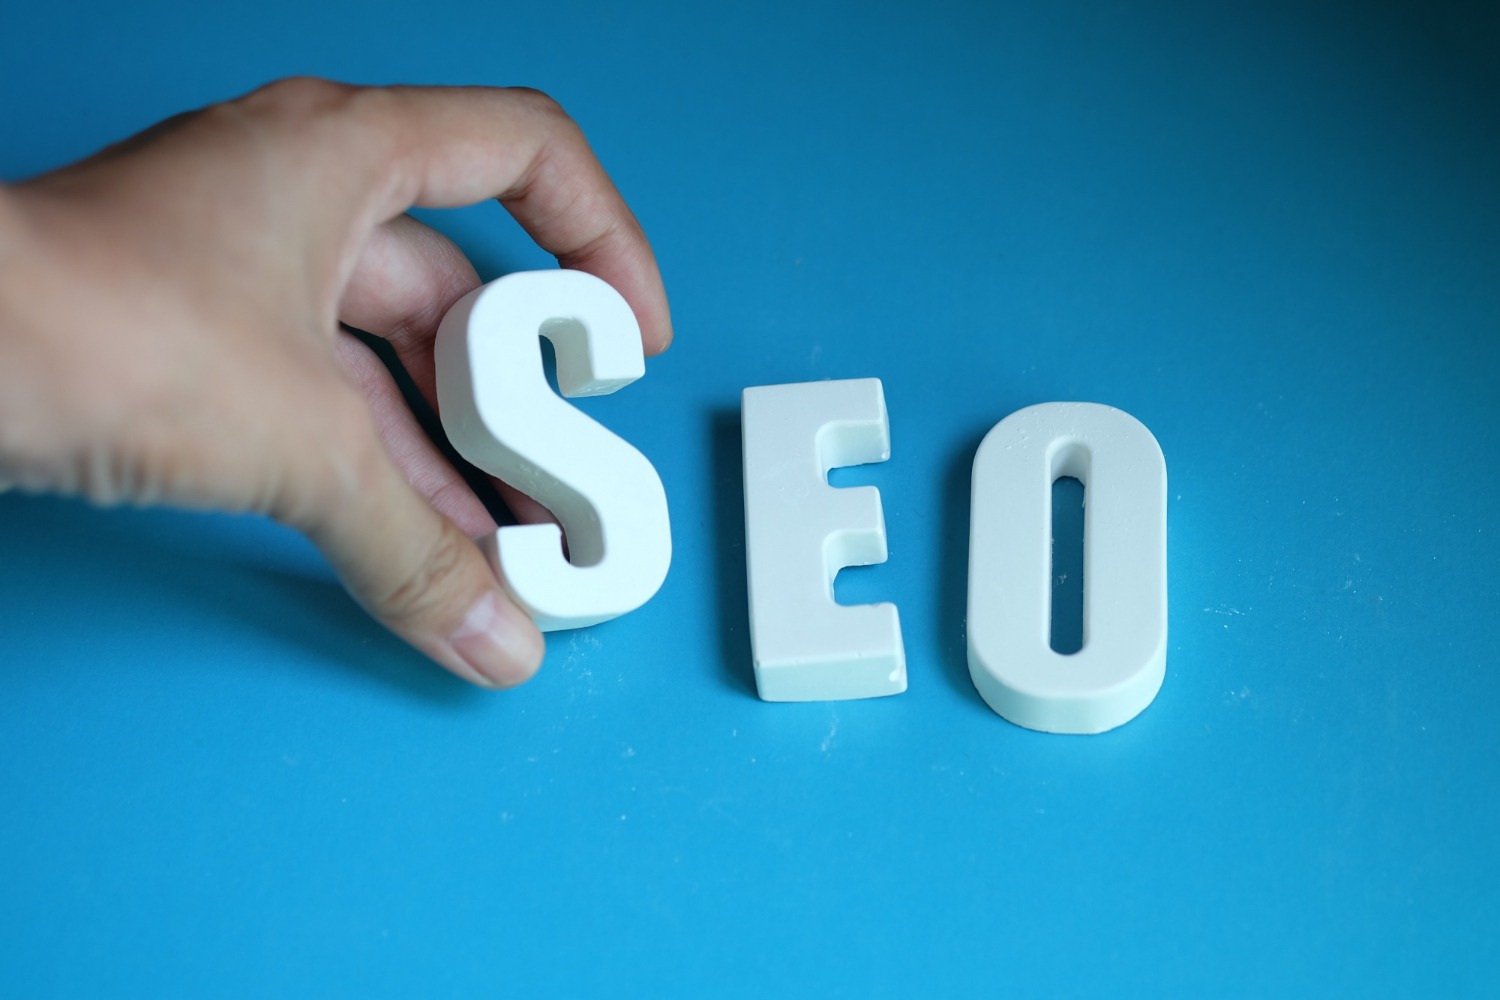 white letters spelling out "SEO" with the S being placed by a hand.